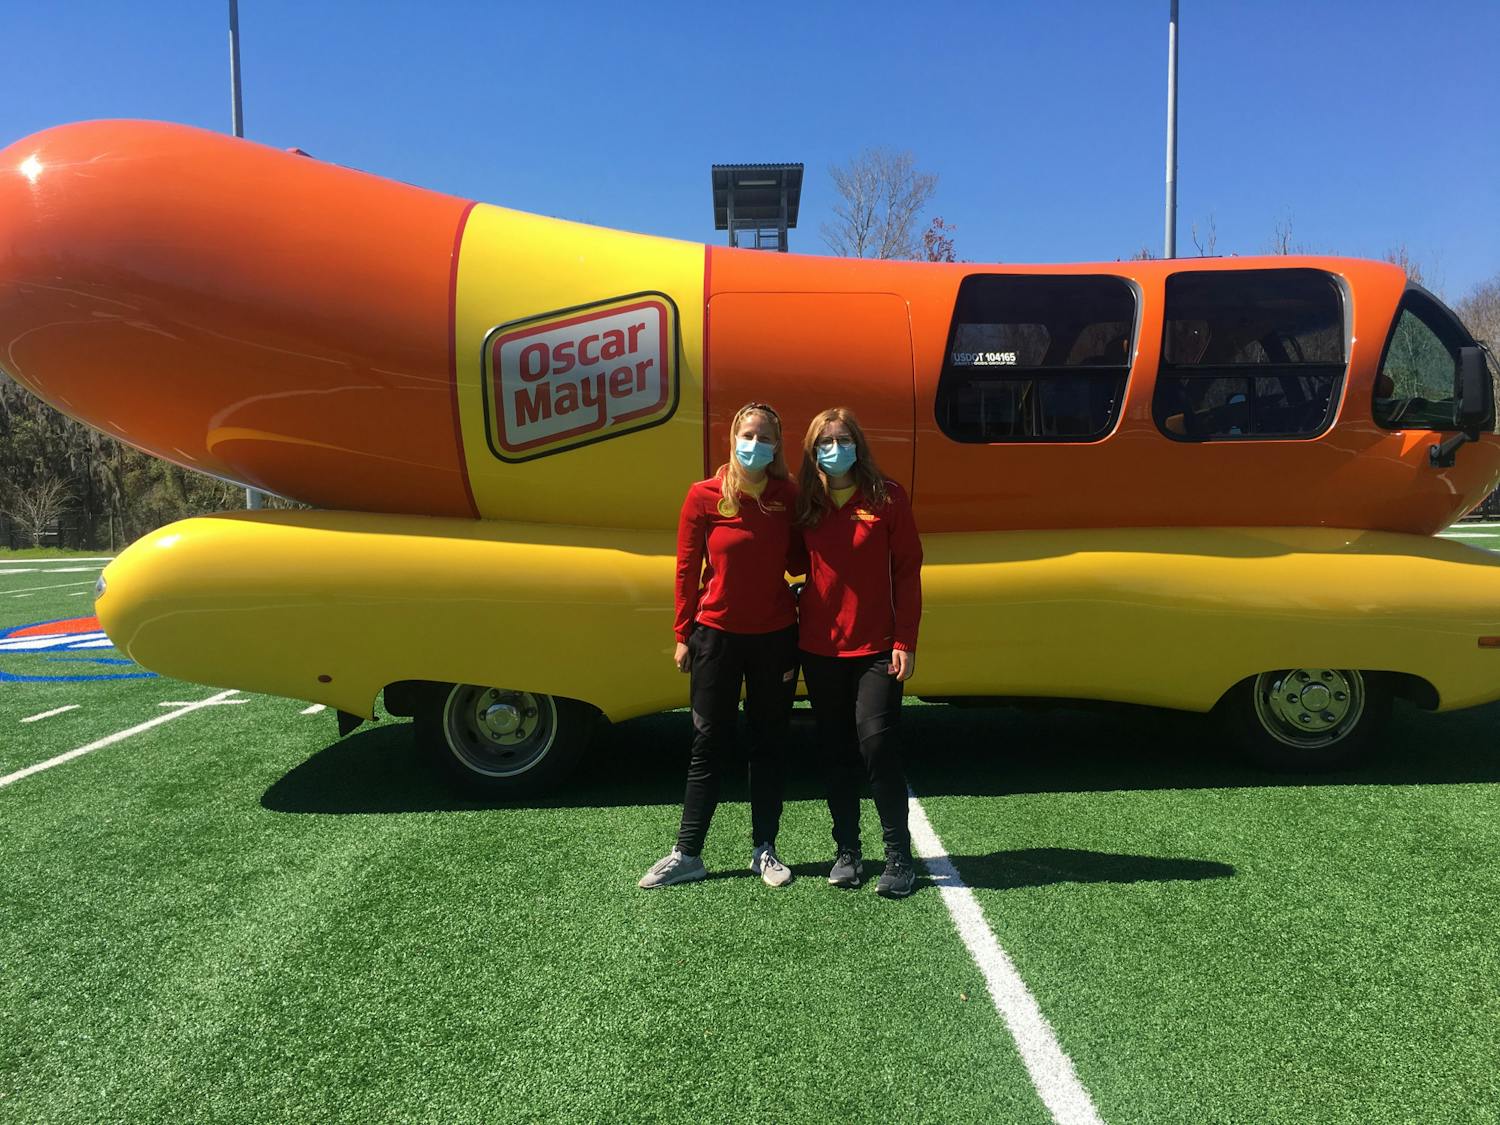 Molly Swindall, left, and Maggie Thomas, right, two of the 12 hotdoggers of Class 33, arrived at UF in the Wienermobile to recruit the next class of hotdoggers.